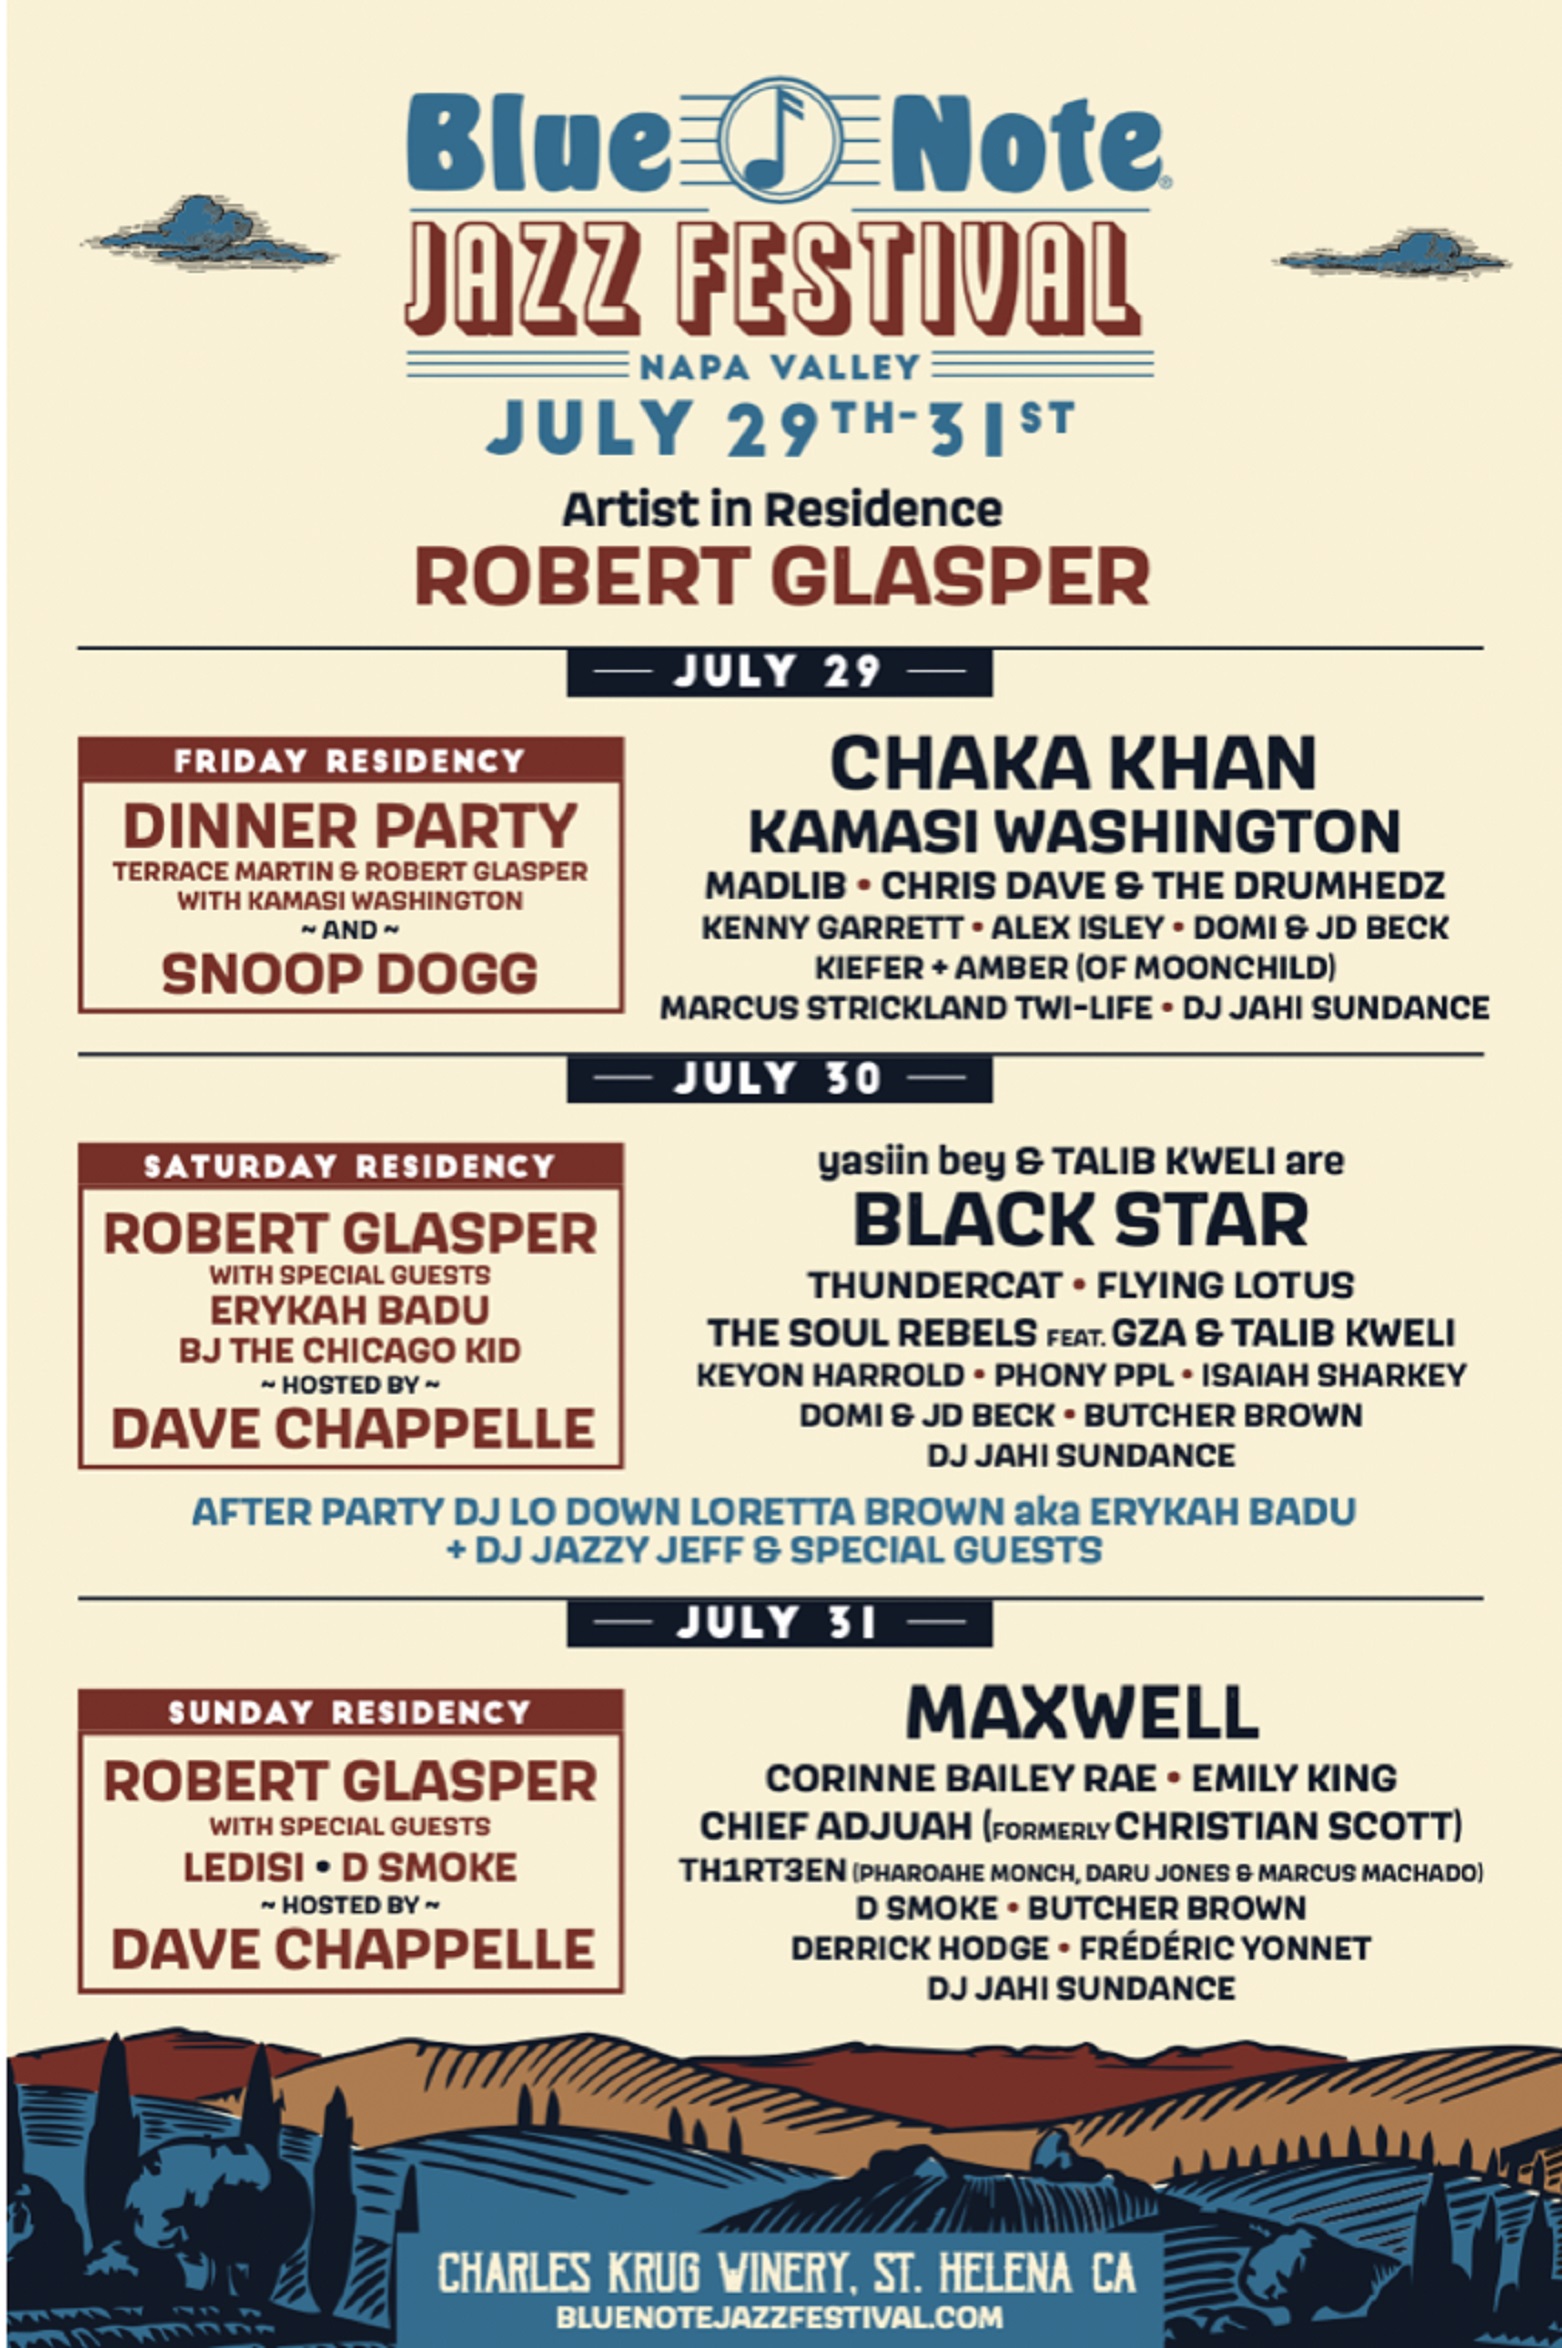 BLUE NOTE JAZZ FESTIVAL NAPA VALLEY ADDS THIRD DATE ON FRIDAY, JULY 29th